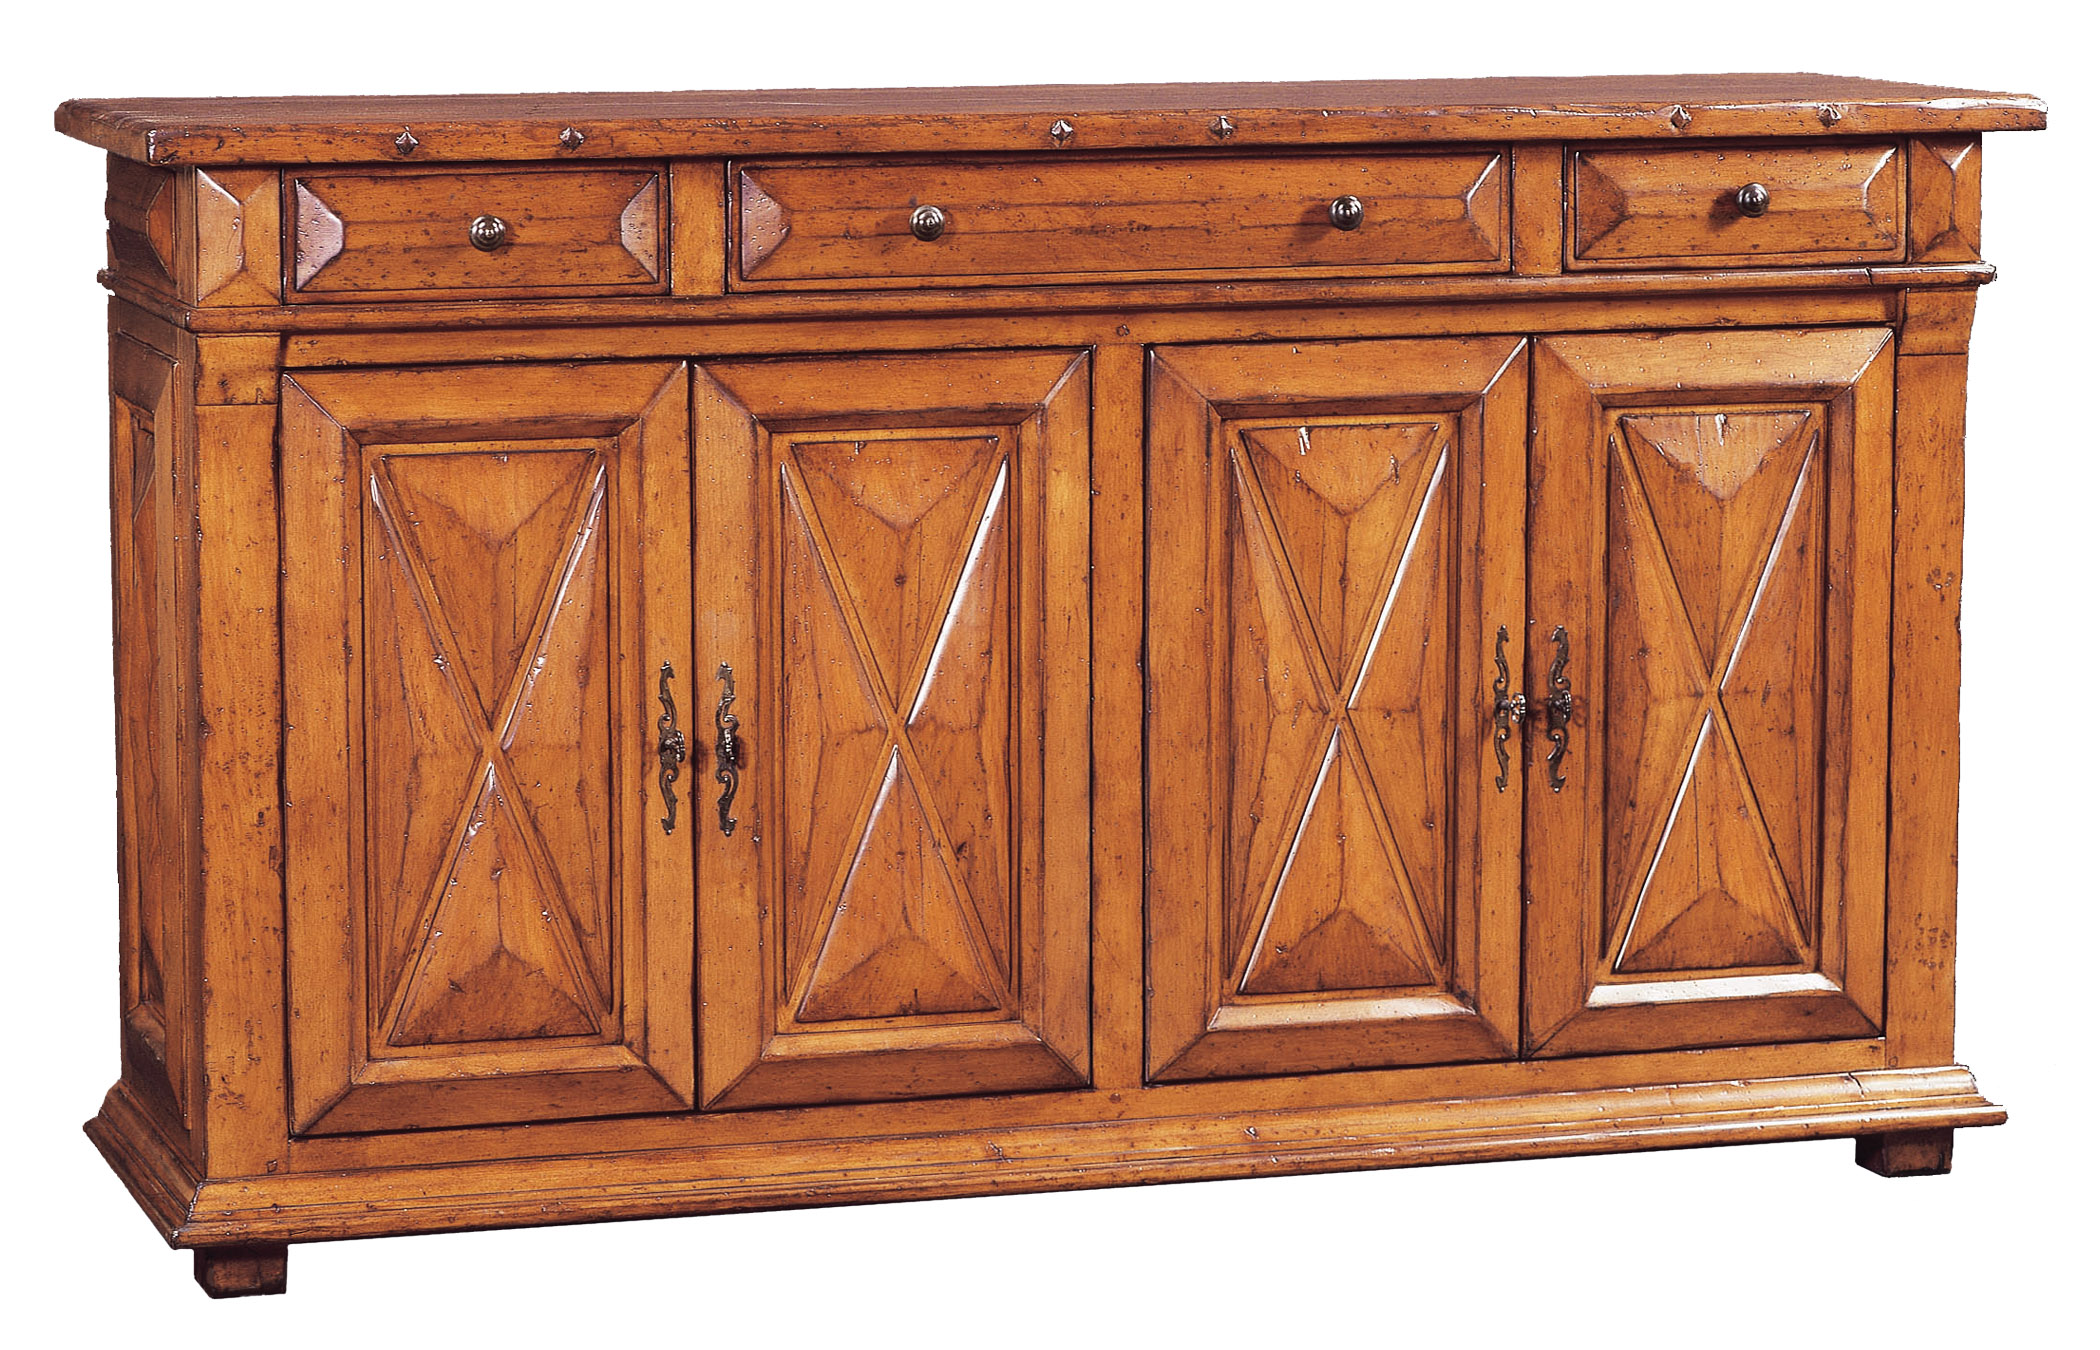 Donato sideboard cabinet with diamond pattern panels by Woodland furniture in Idaho falls